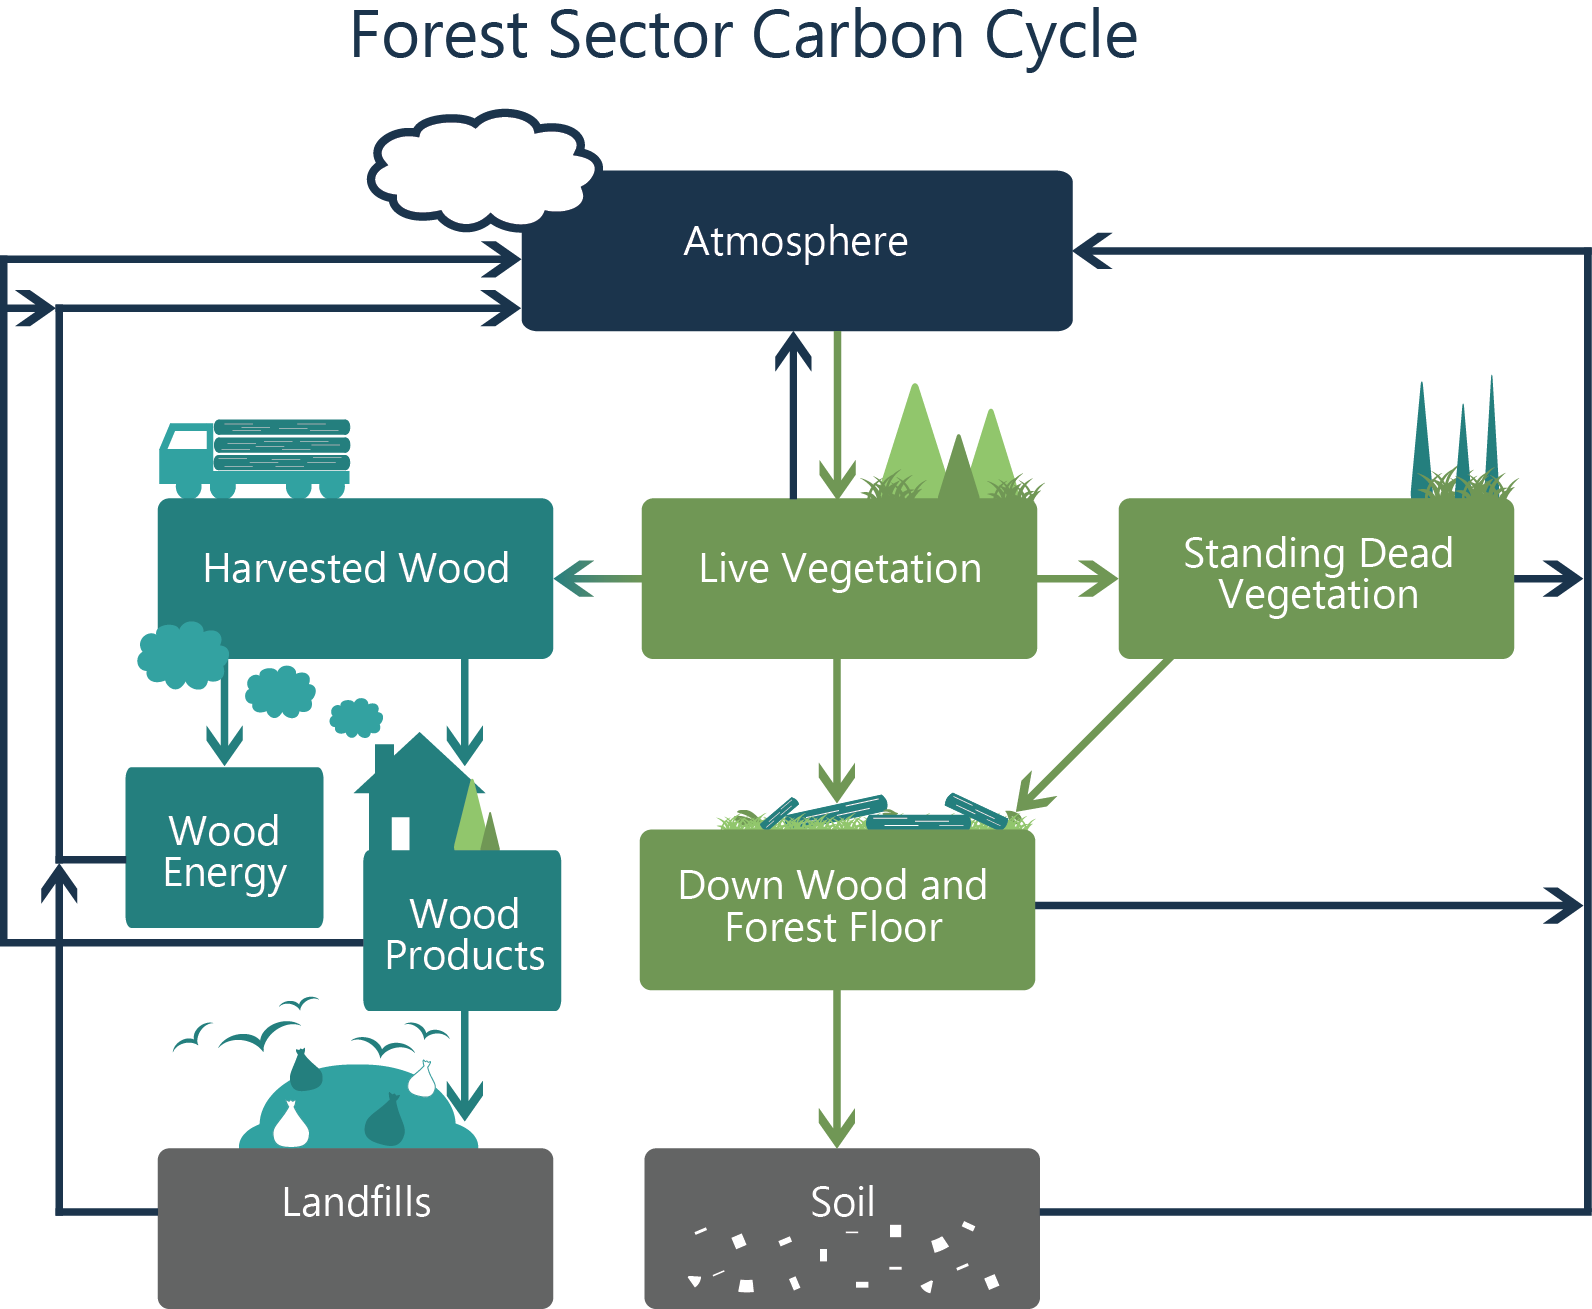 The forest sector carbon cycle includes forest carbon stocks and transfers between stocks. Carbon flows between the atmosphere, live vegetation, standing dead vegetation, the forest floor, soil, and back to the atmosphere.